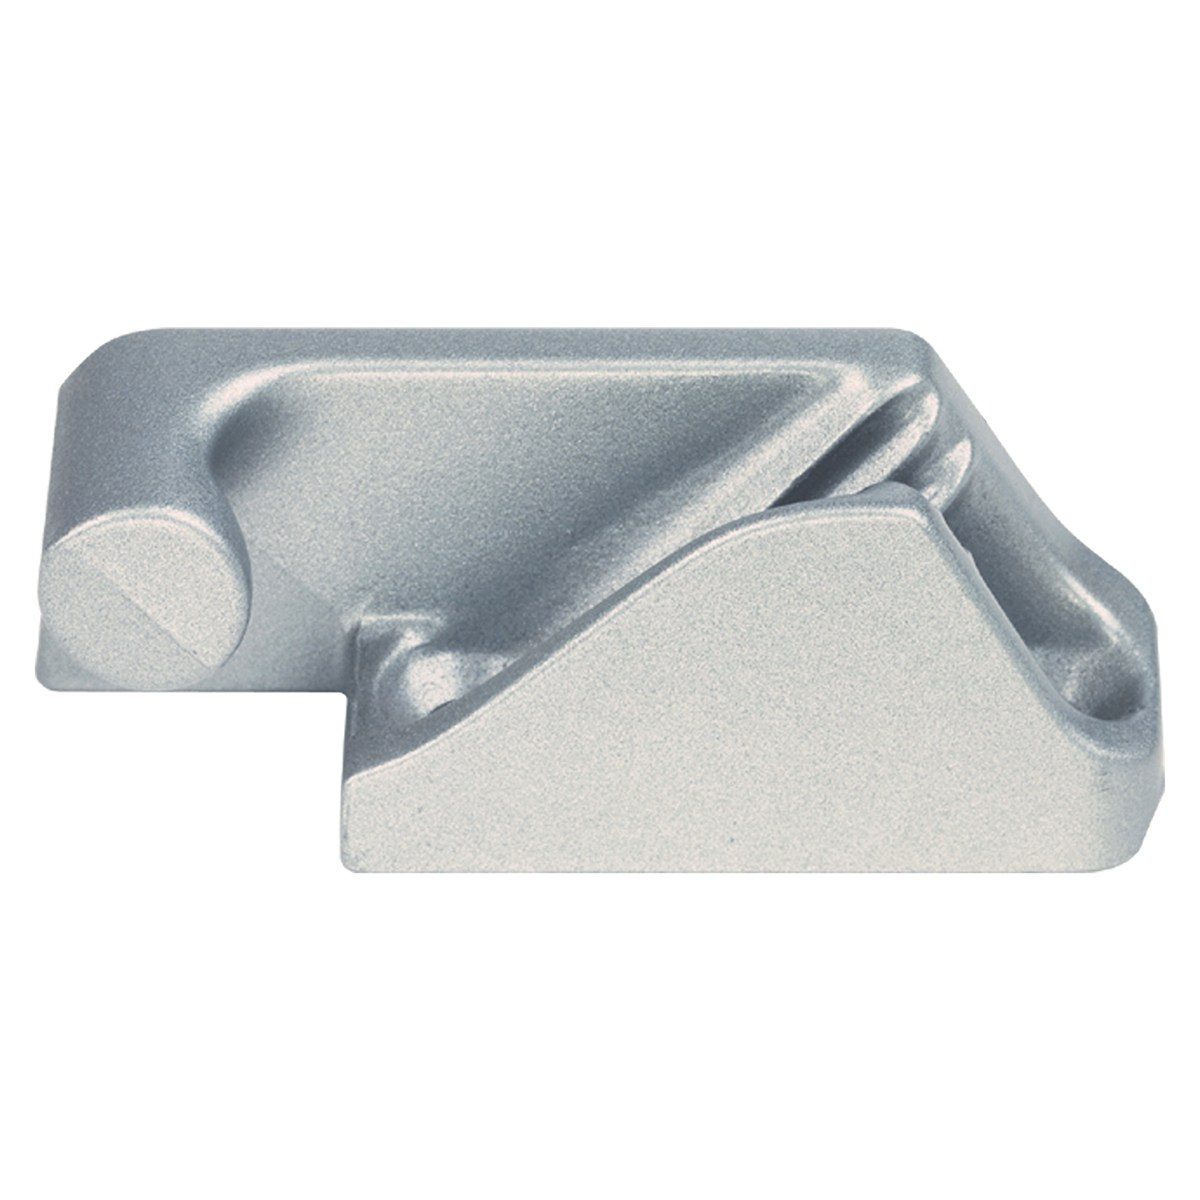 C218M2T - Clamcleat 6mm Side (P) Silver (Pk Size: 50)